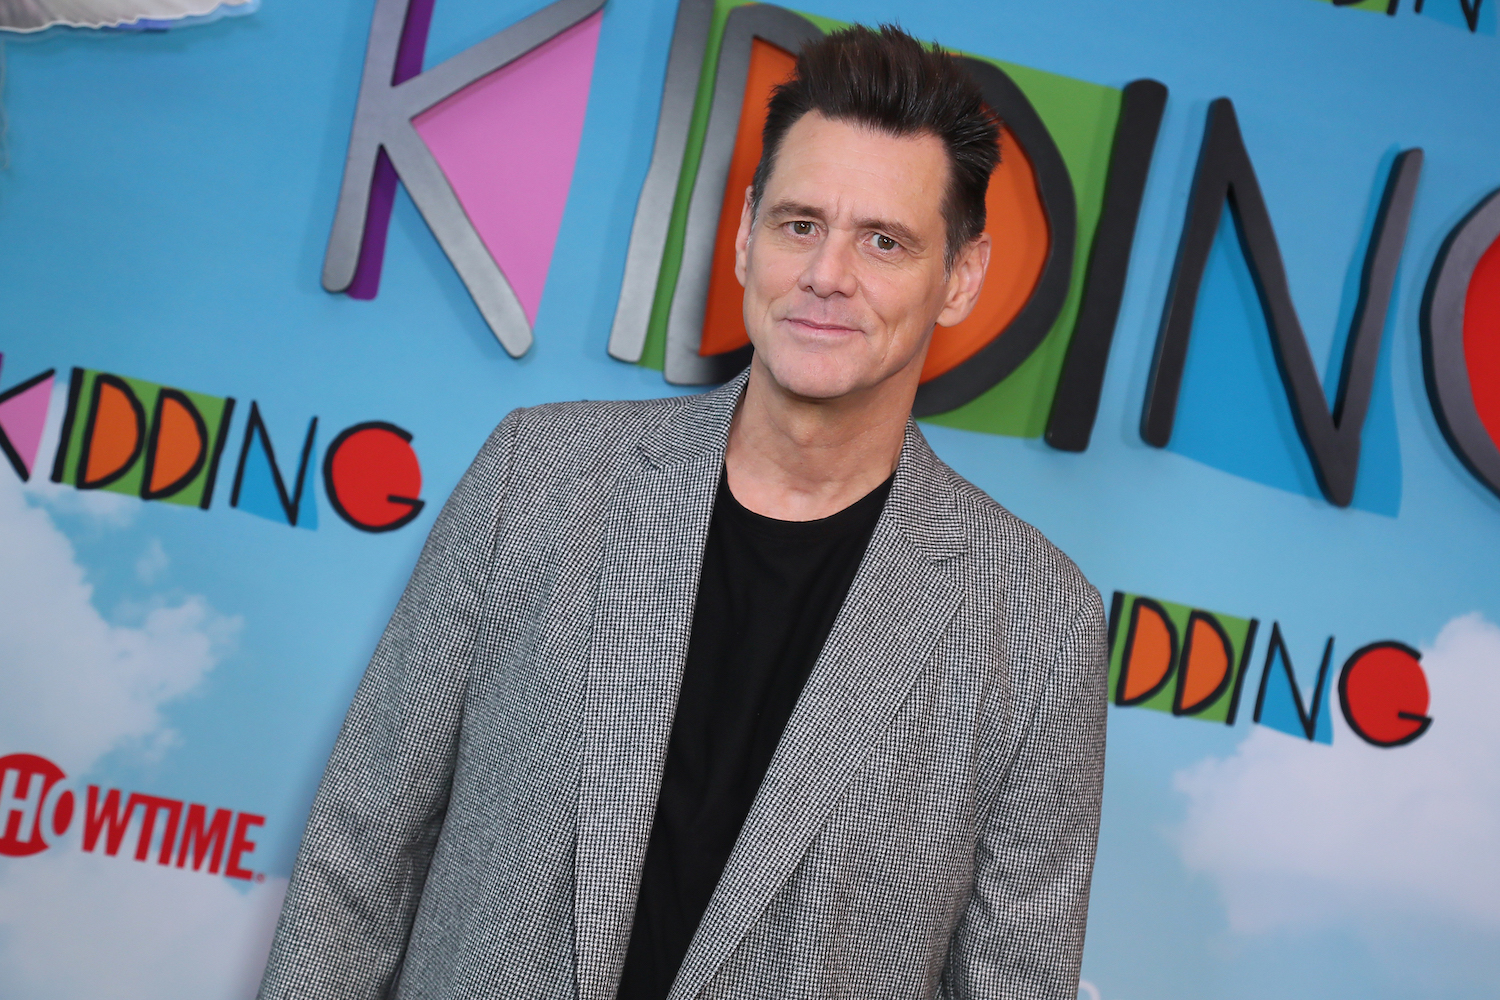 Jim Carrey smiling slightly in front of a multicolored background